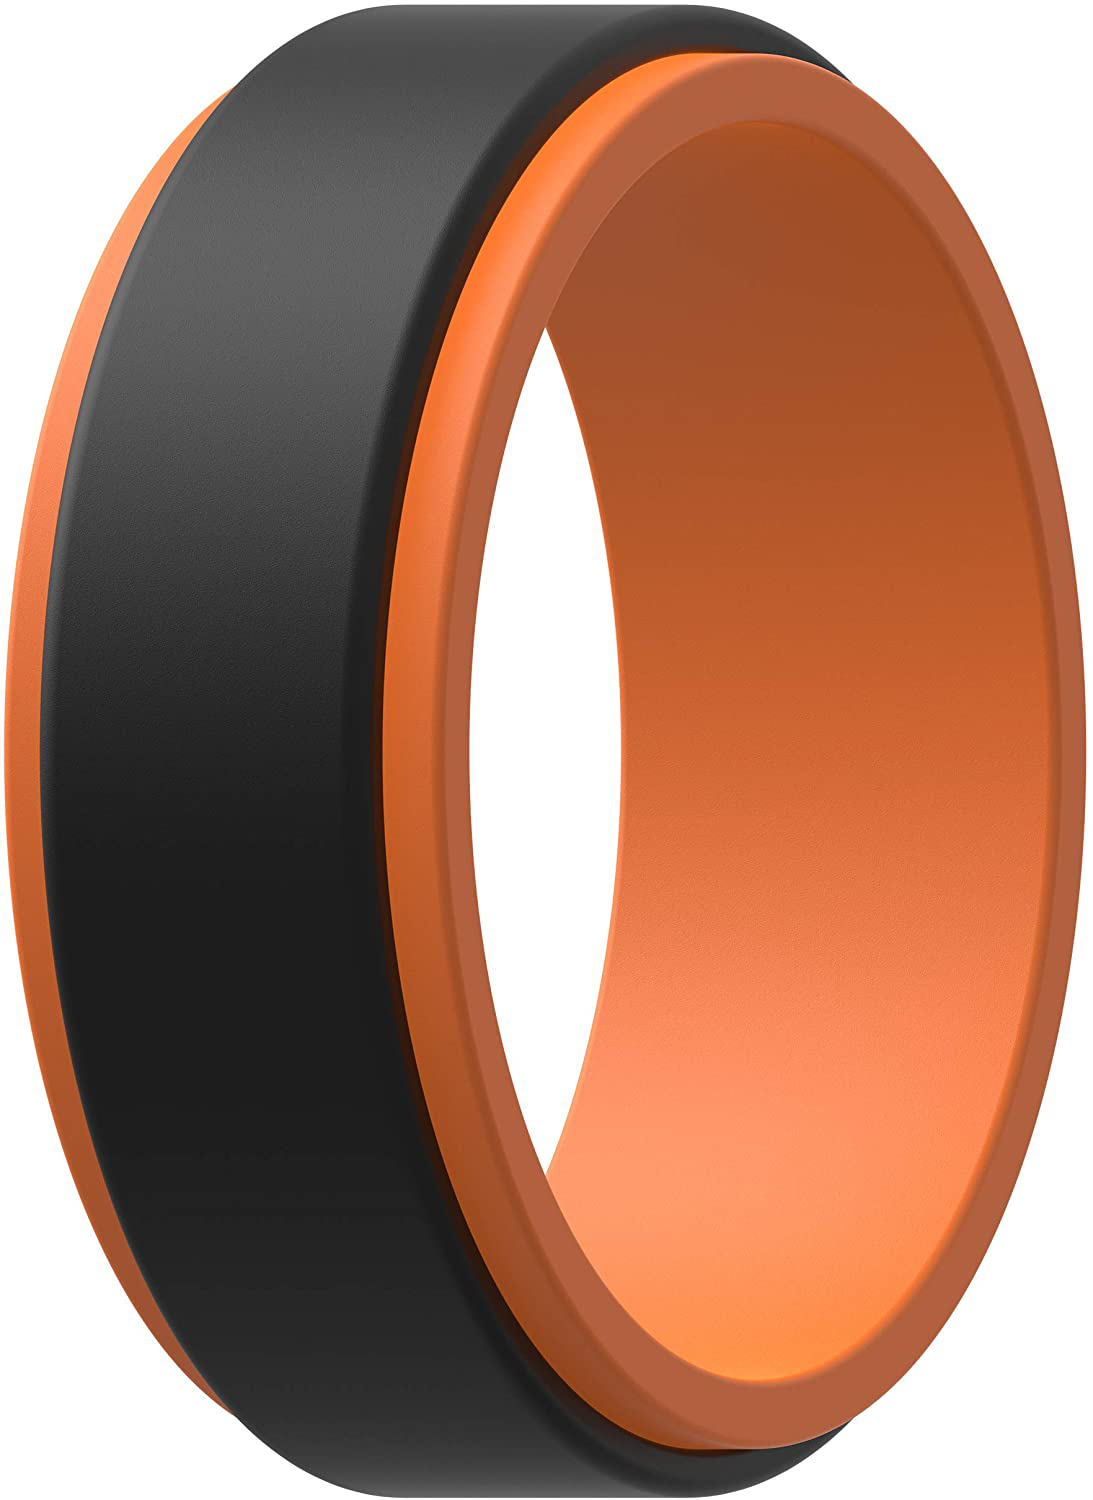 ThunderFit Silicone Wedding Rings for Men, 2 Layers Step Edge - 8mm Width - 2mm Thick